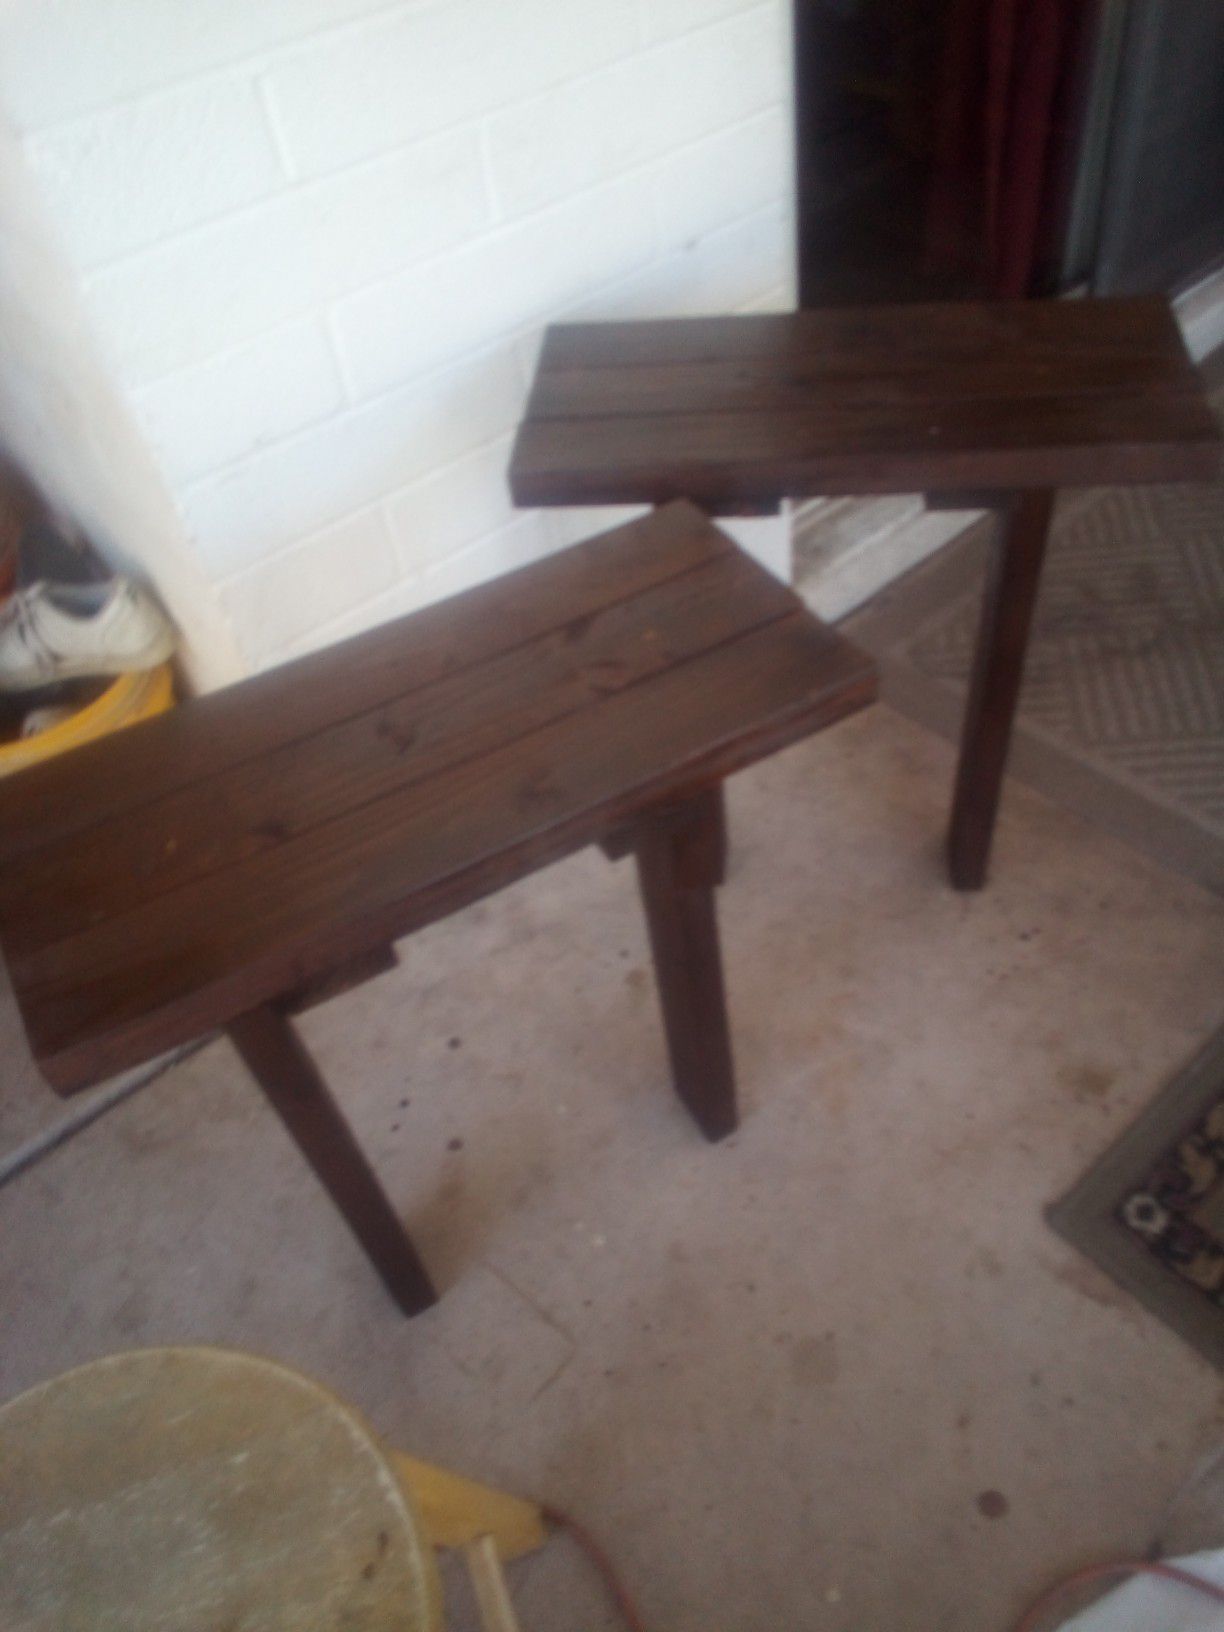 2 MATCHING dark walnut STAINED END TABLES $35 FOR SET (LIGHT WEIGHT) UNIQUE ONE OF A KIND